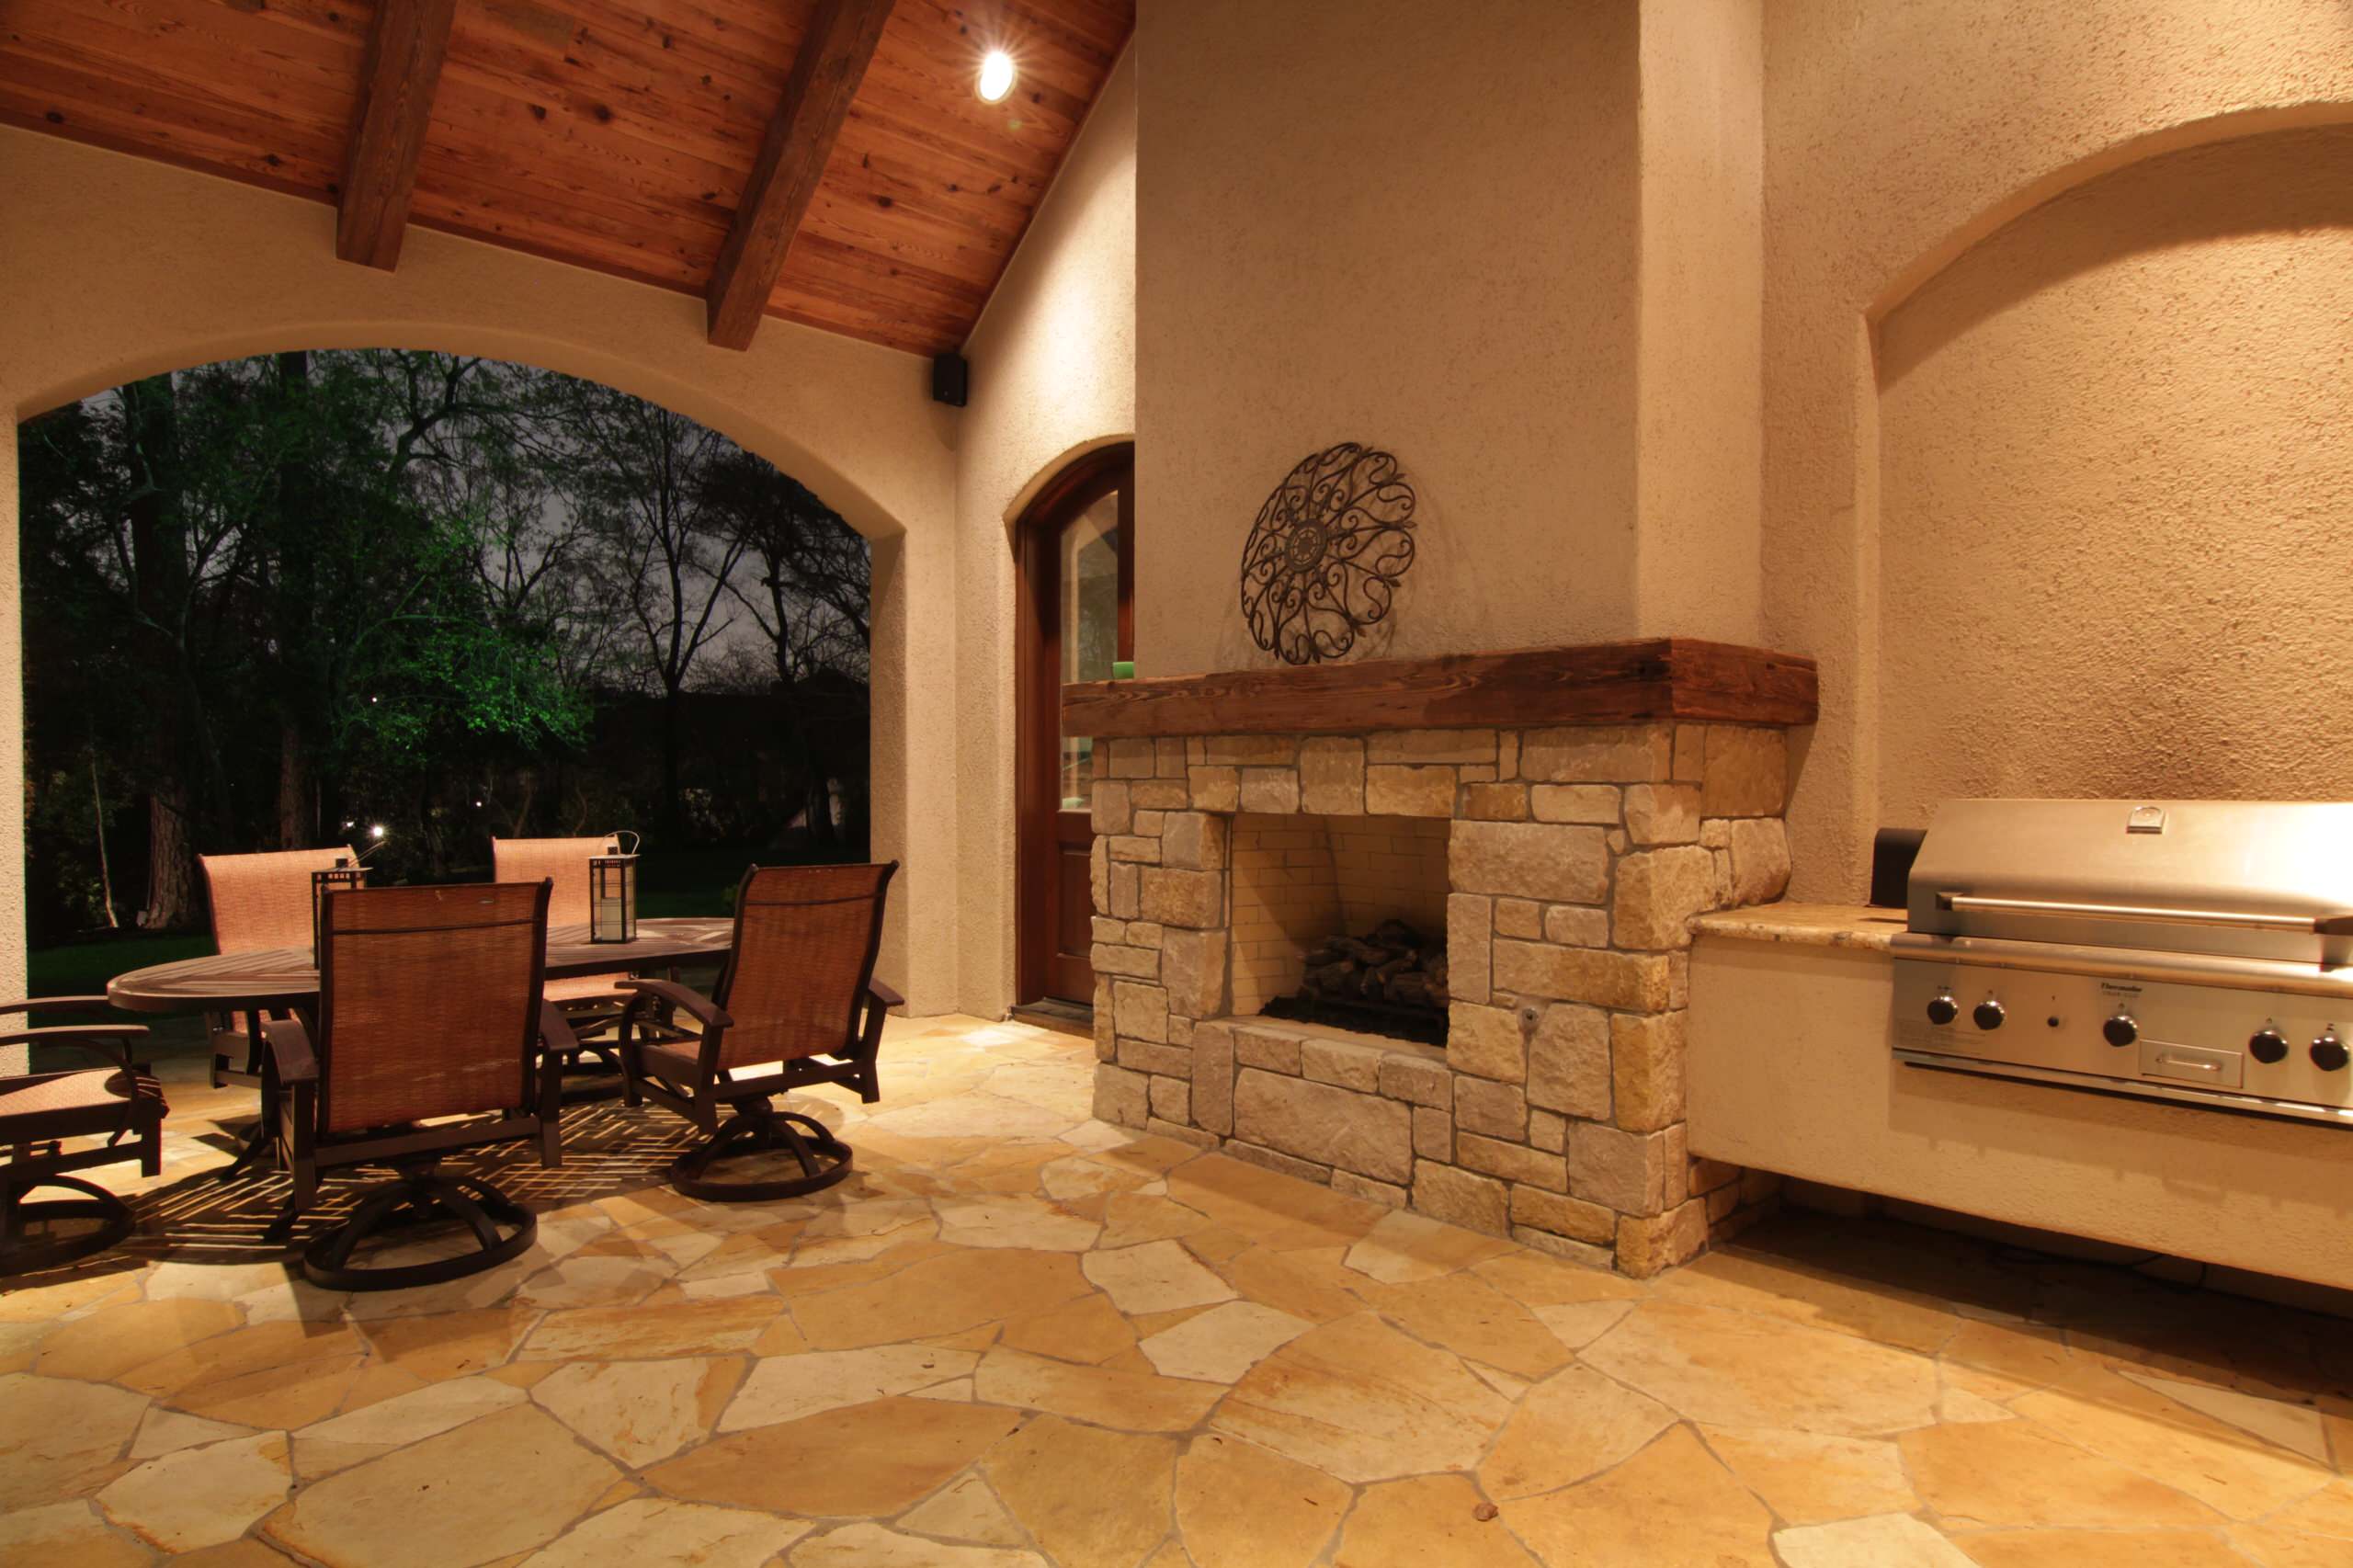 Outdoor Grilling & Dining Area